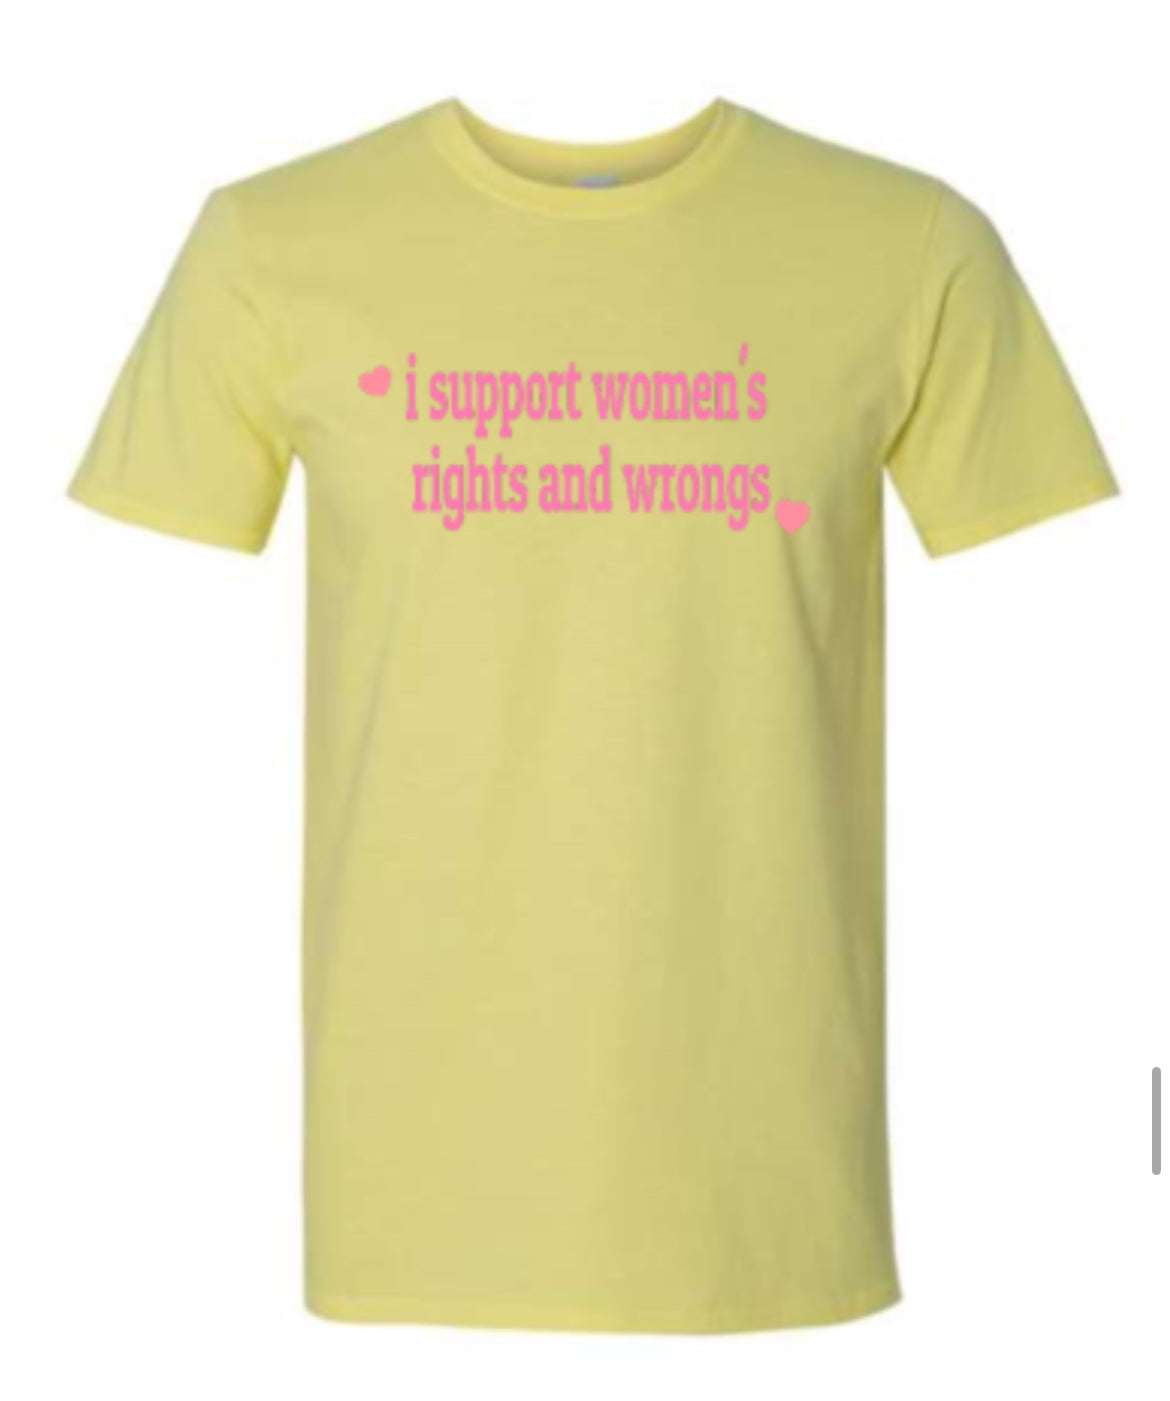 a yellow t - shirt that says i support women's rights and wrongs